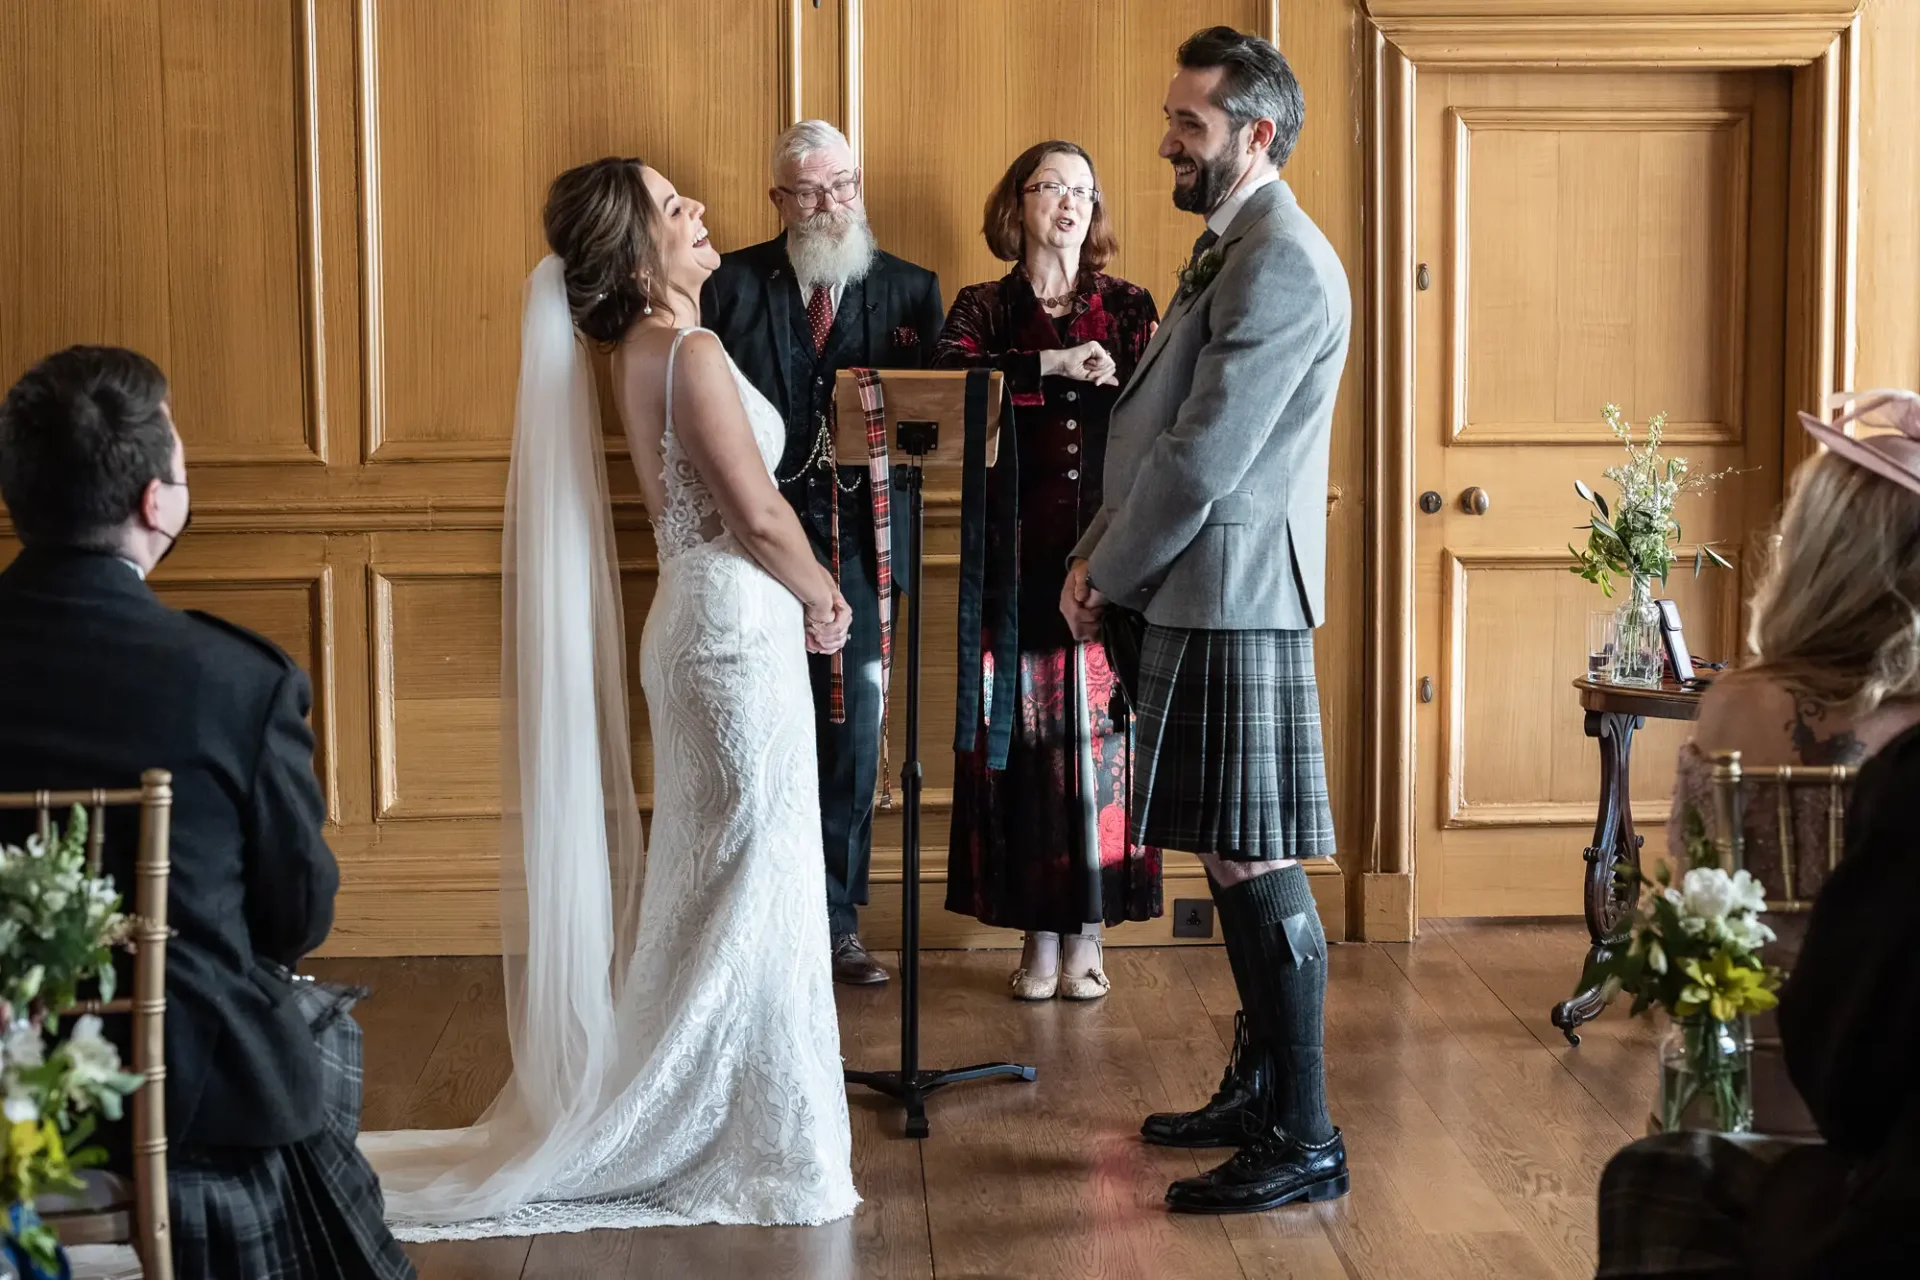 Bride and groom smiling at each other during their wedding ceremony, with an officiant and attendees in a wood-paneled room. the groom wears a kilt.